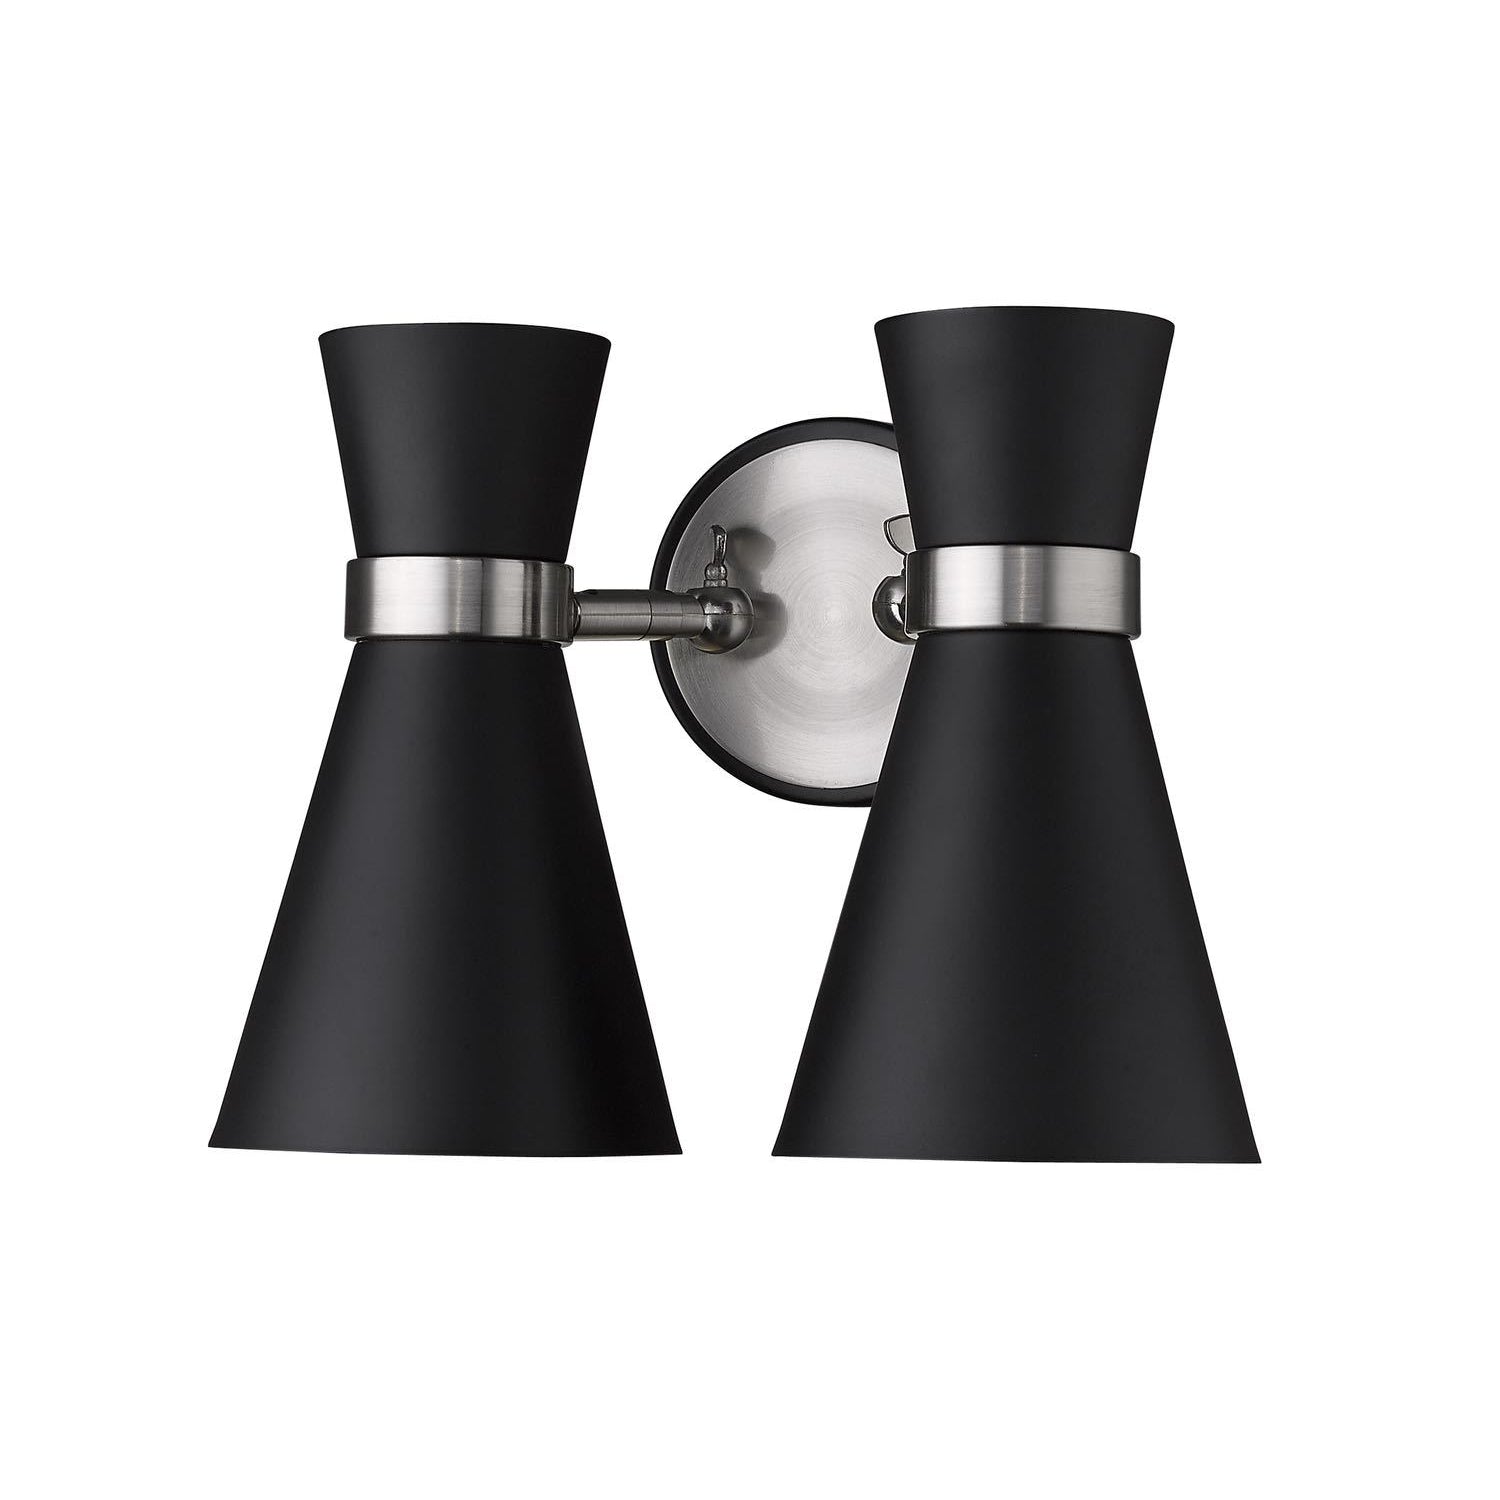 Soriano Wall Sconce Matte Black + Brushed Nickel